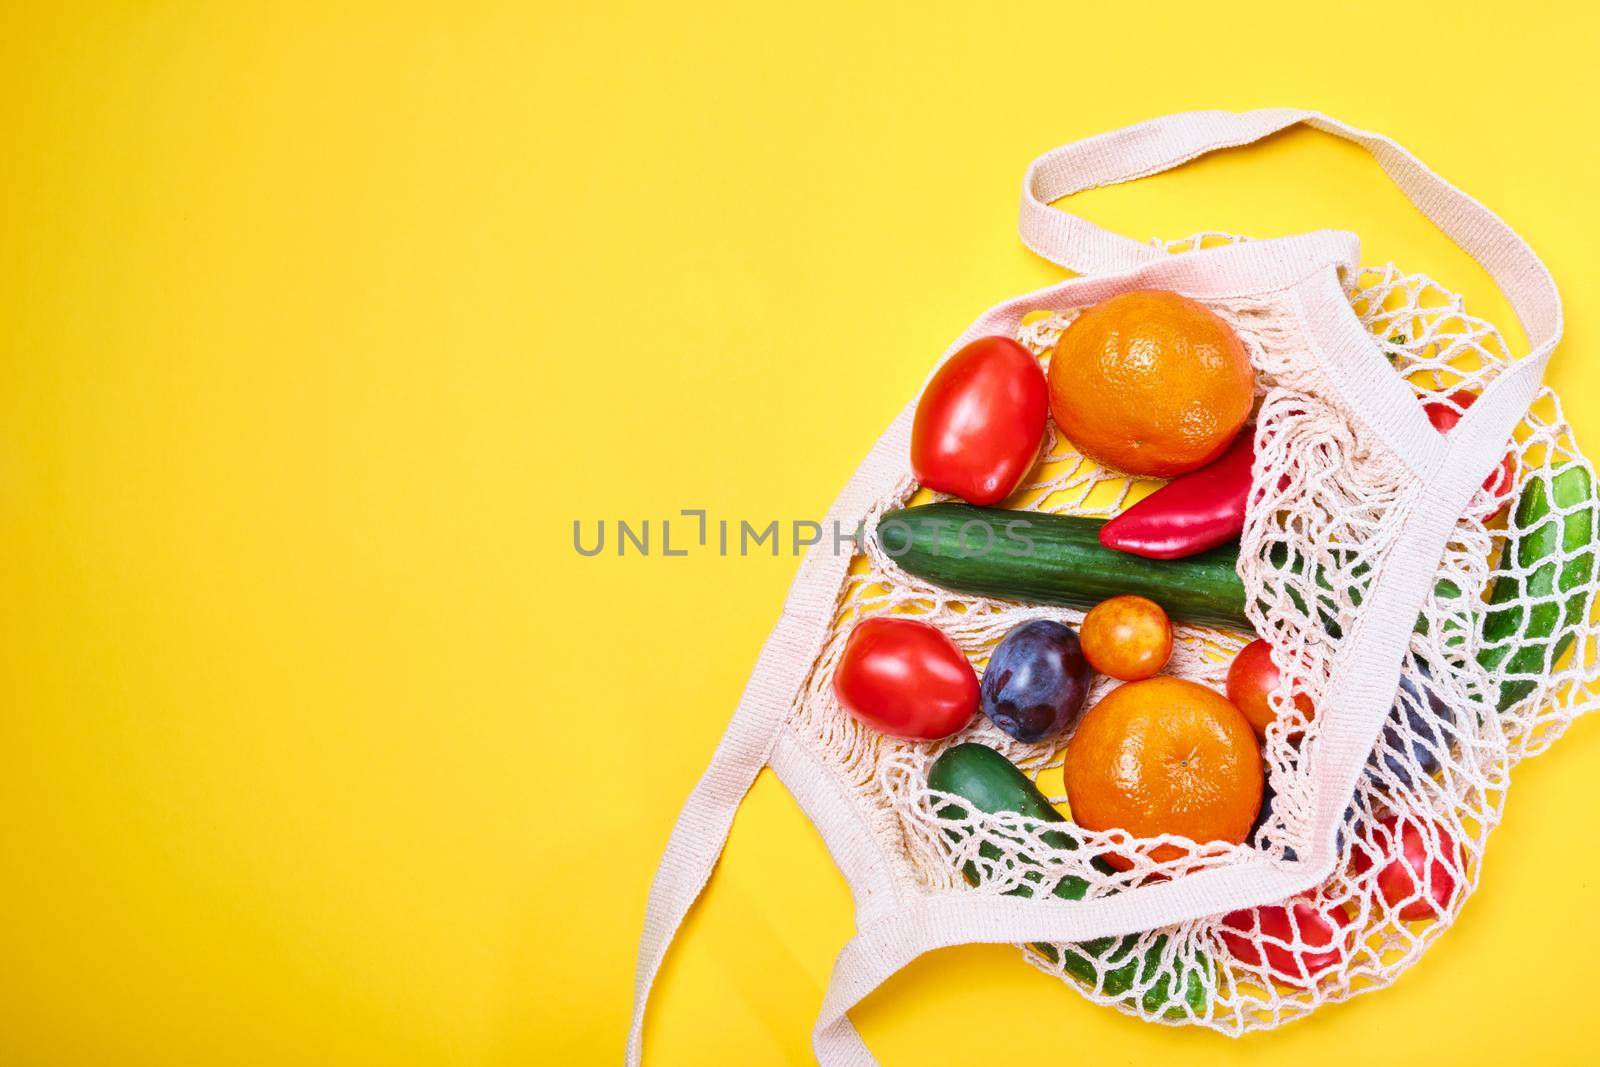 groceries in eco bags. eco natural bags with fruits and vegetables, eco friendly, flat lay. sustainable lifestyle concept. zero waste food shopping. plastic free items. reuse, reduce, recycle, refuse by natashko